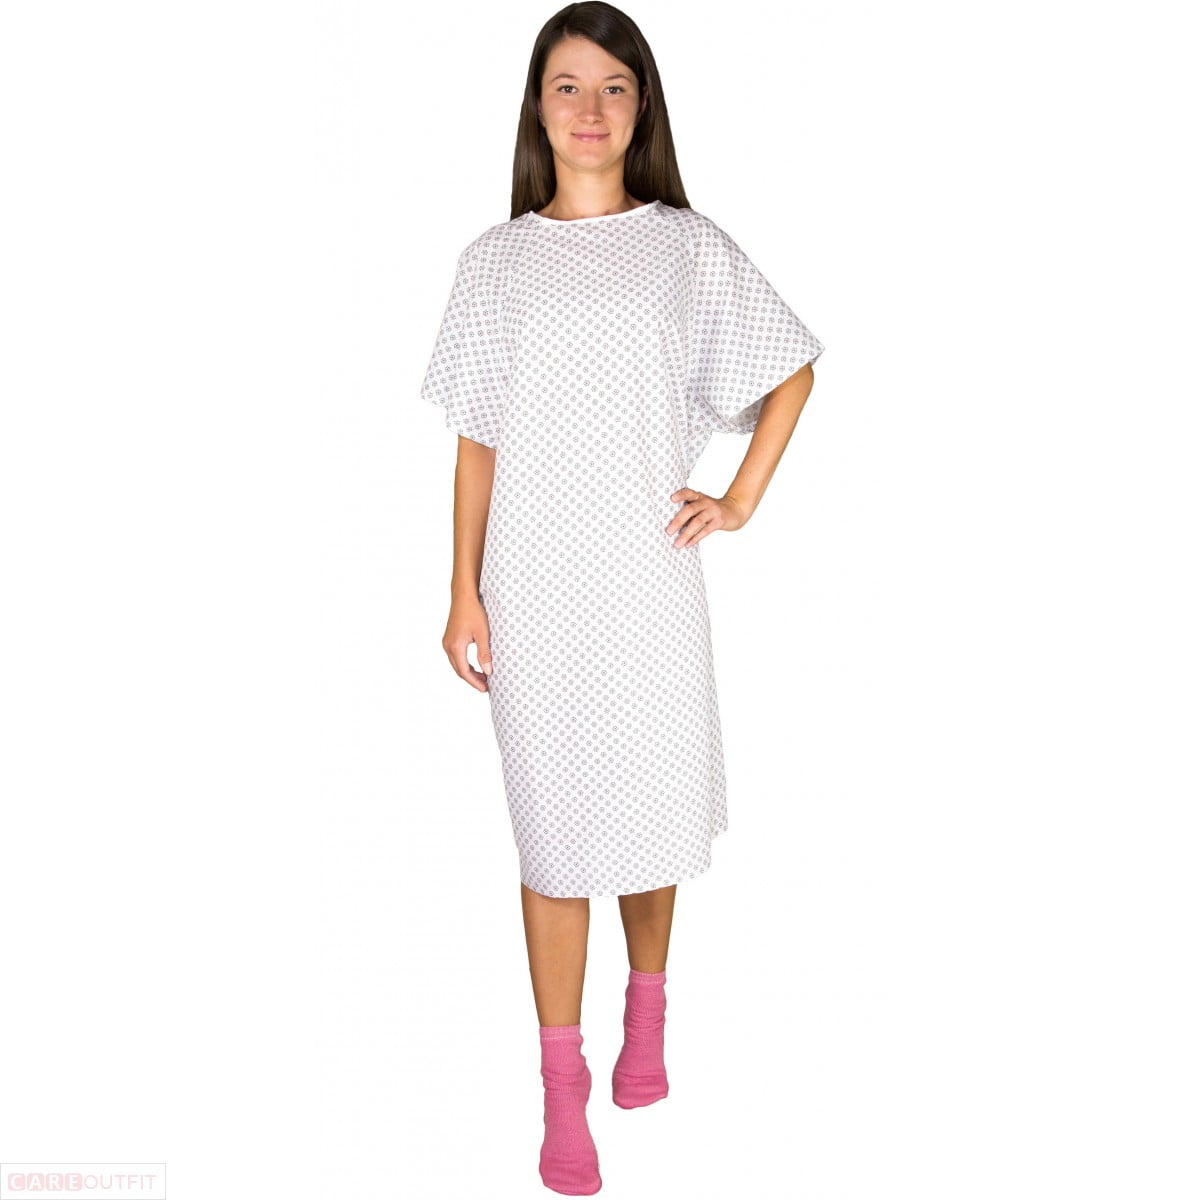 Pink Cotton Patient Gown, Medium. Pack of 1 Hospital Gowns for Women. 100%  Cotton Cloth Breathable Hospital Patient Gowns for Women. Machine-Washable Hospital  Patient Clothing - Walmart.com